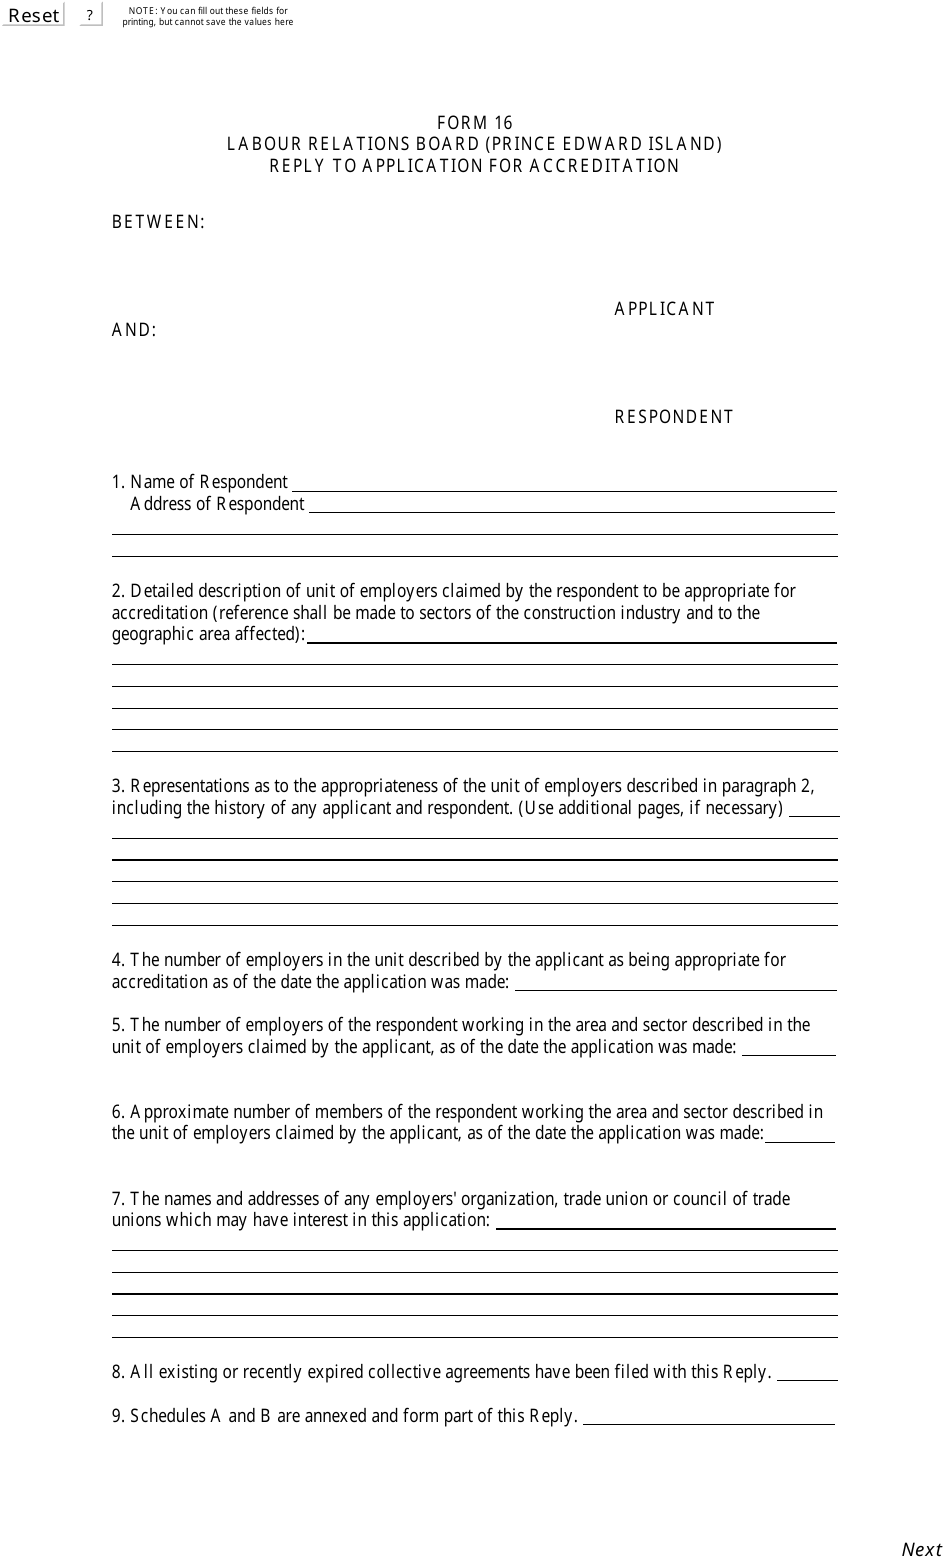 Form 16 Reply to Application for Accreditation - Prince Edward Island, Canada, Page 1